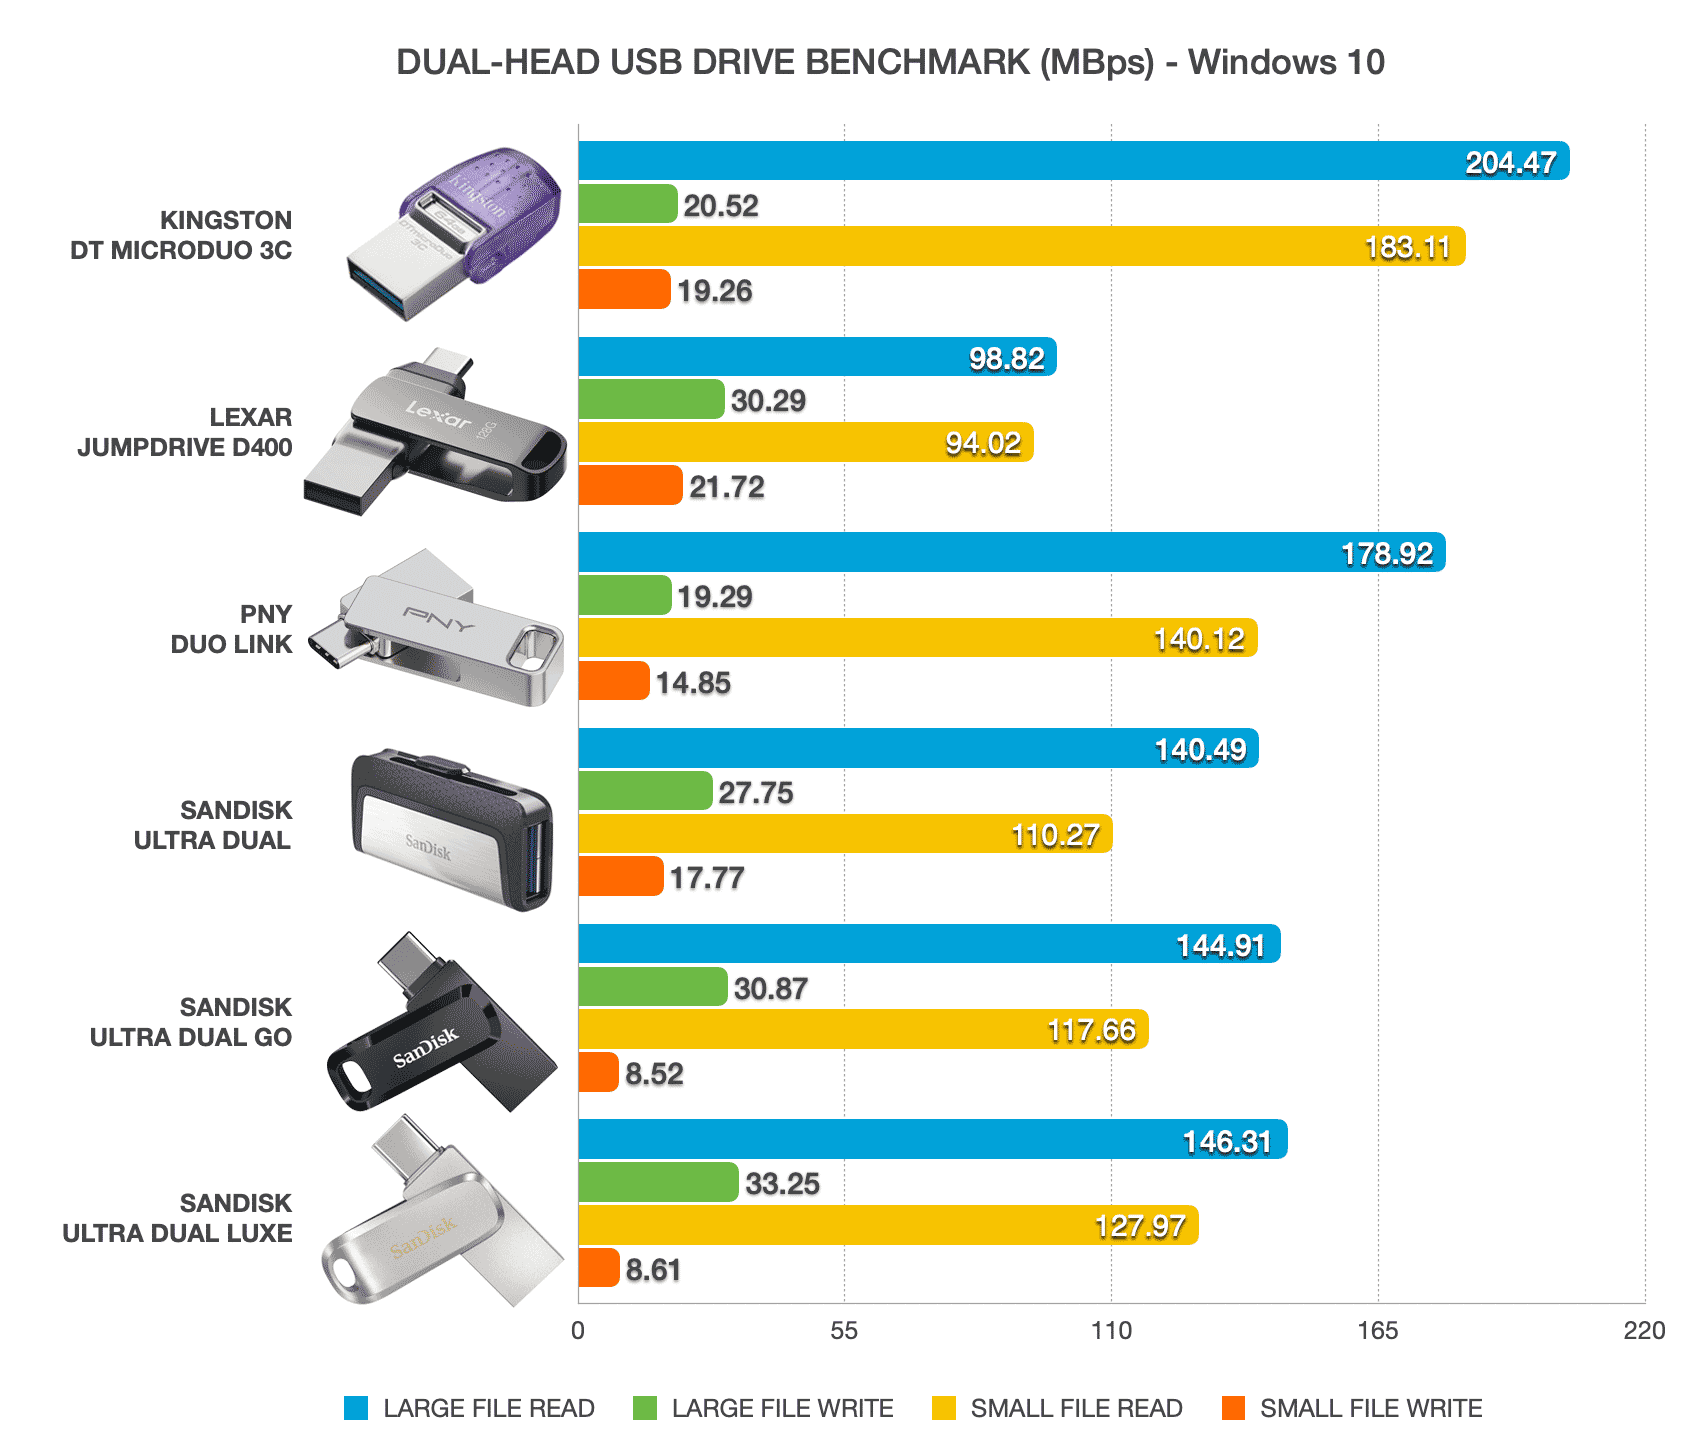 Bar chart comparing USB speeds between Kingston DataTraveler MicroDuo 3C, Samsung Duo Plus, Sandisk Ultra Dual, Ultra Dual Go and Ultra Dual Luxe on Windows 10.